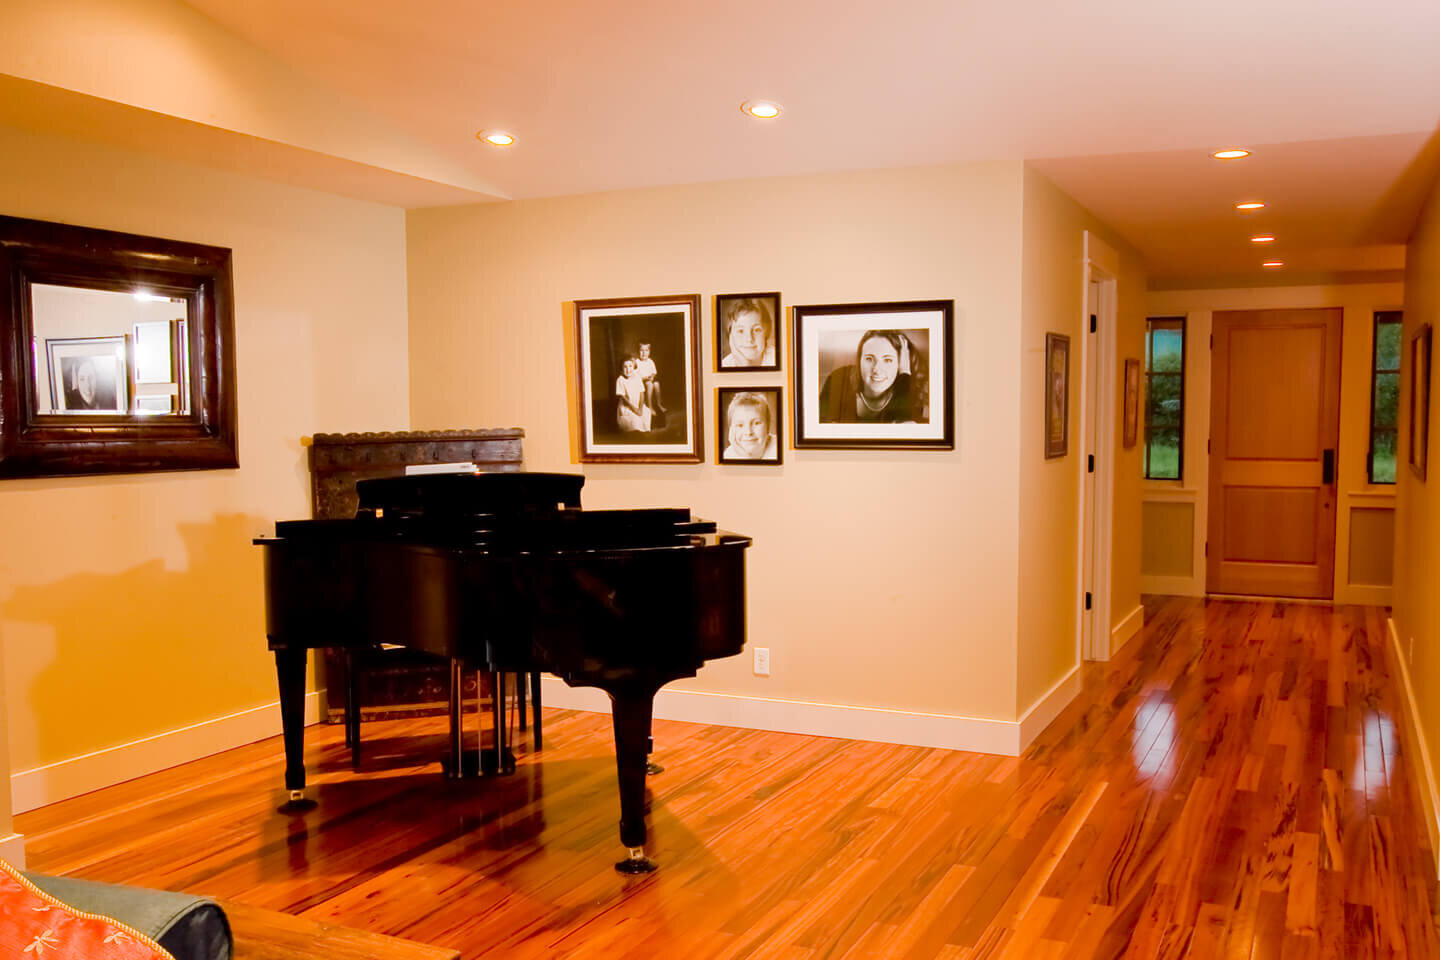 Grand piano on varnished wood floor